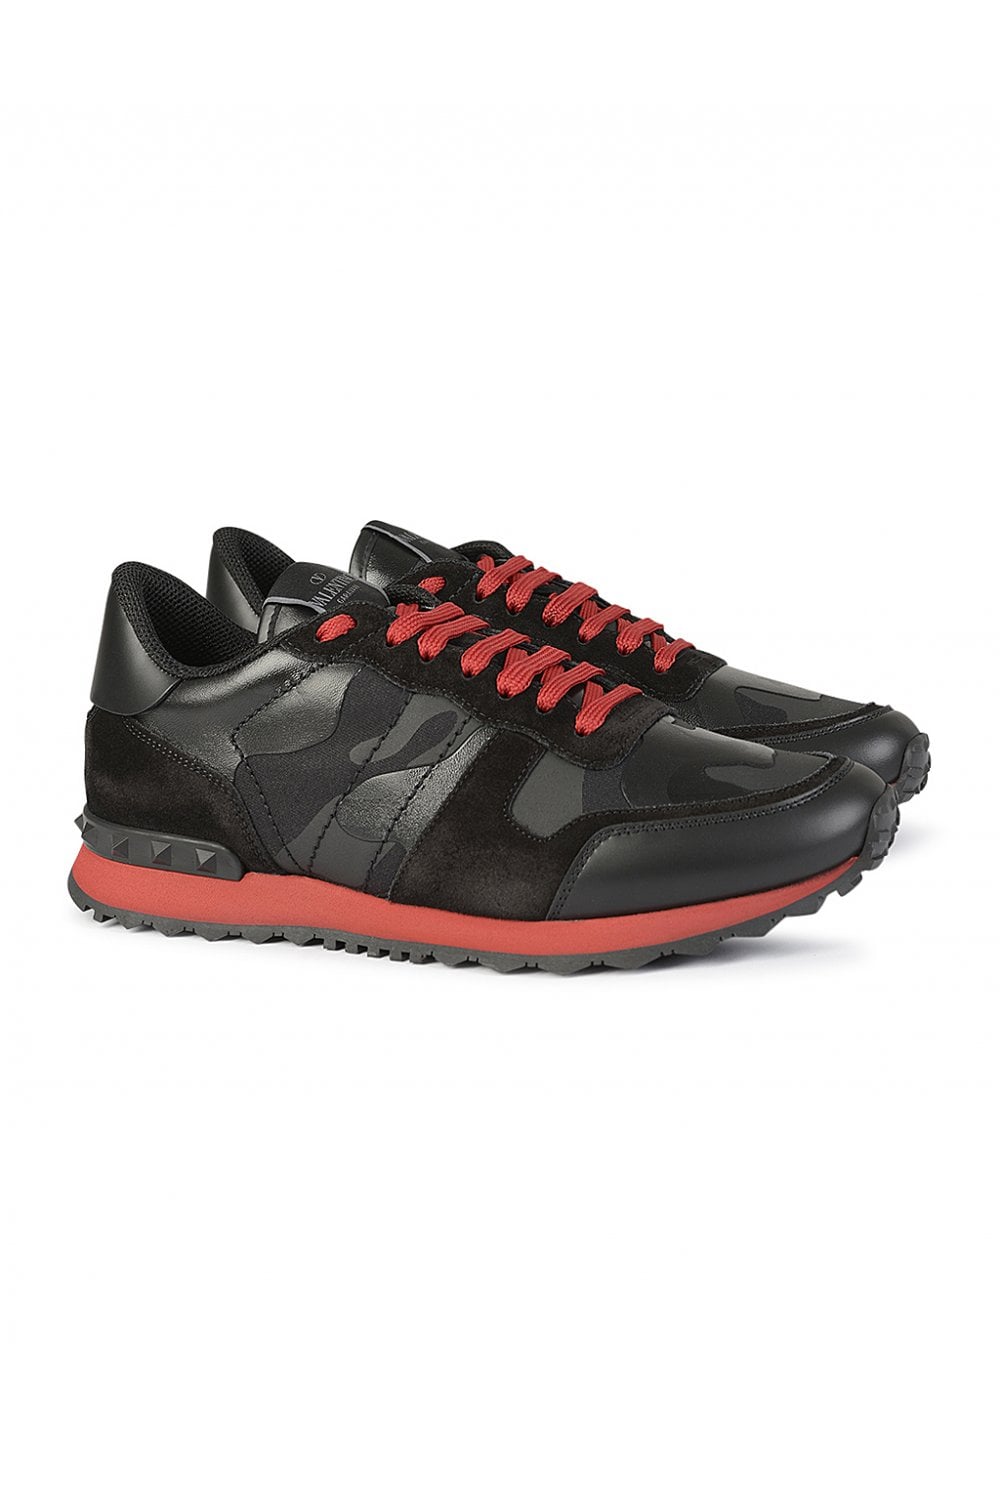 Valentino Cameo Rockrunner Trainers Black/Red